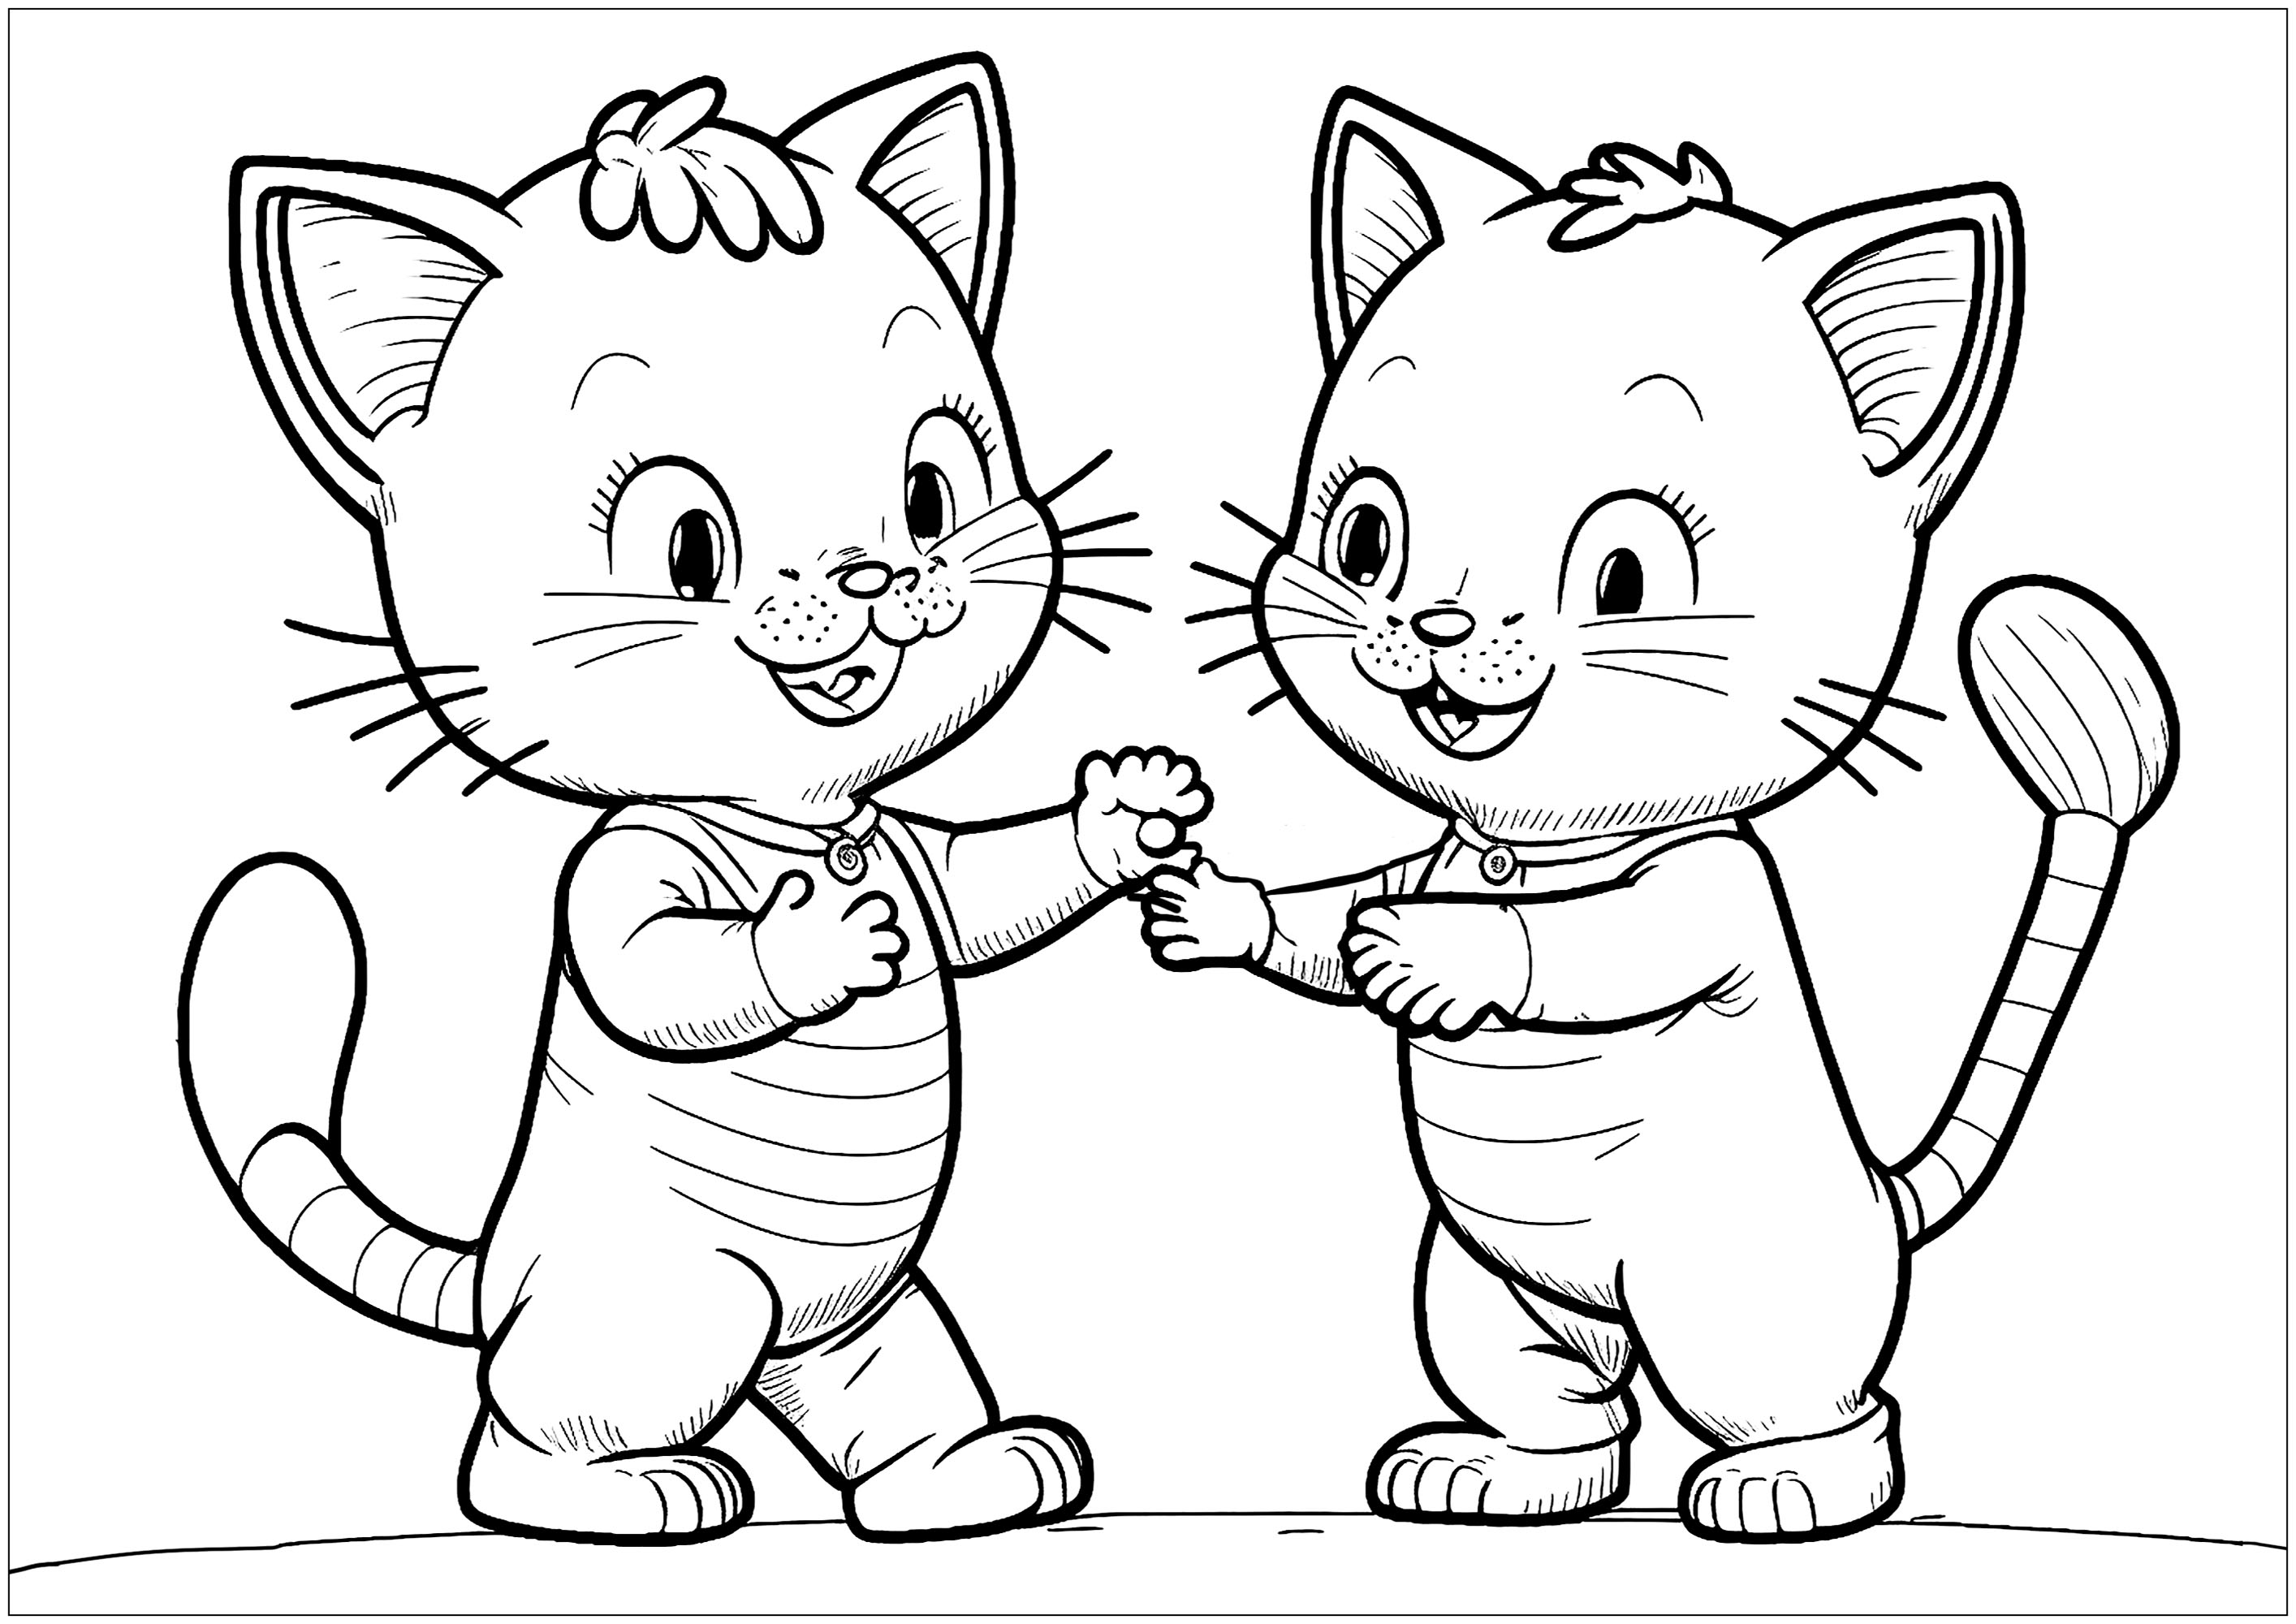 Two little cats playing